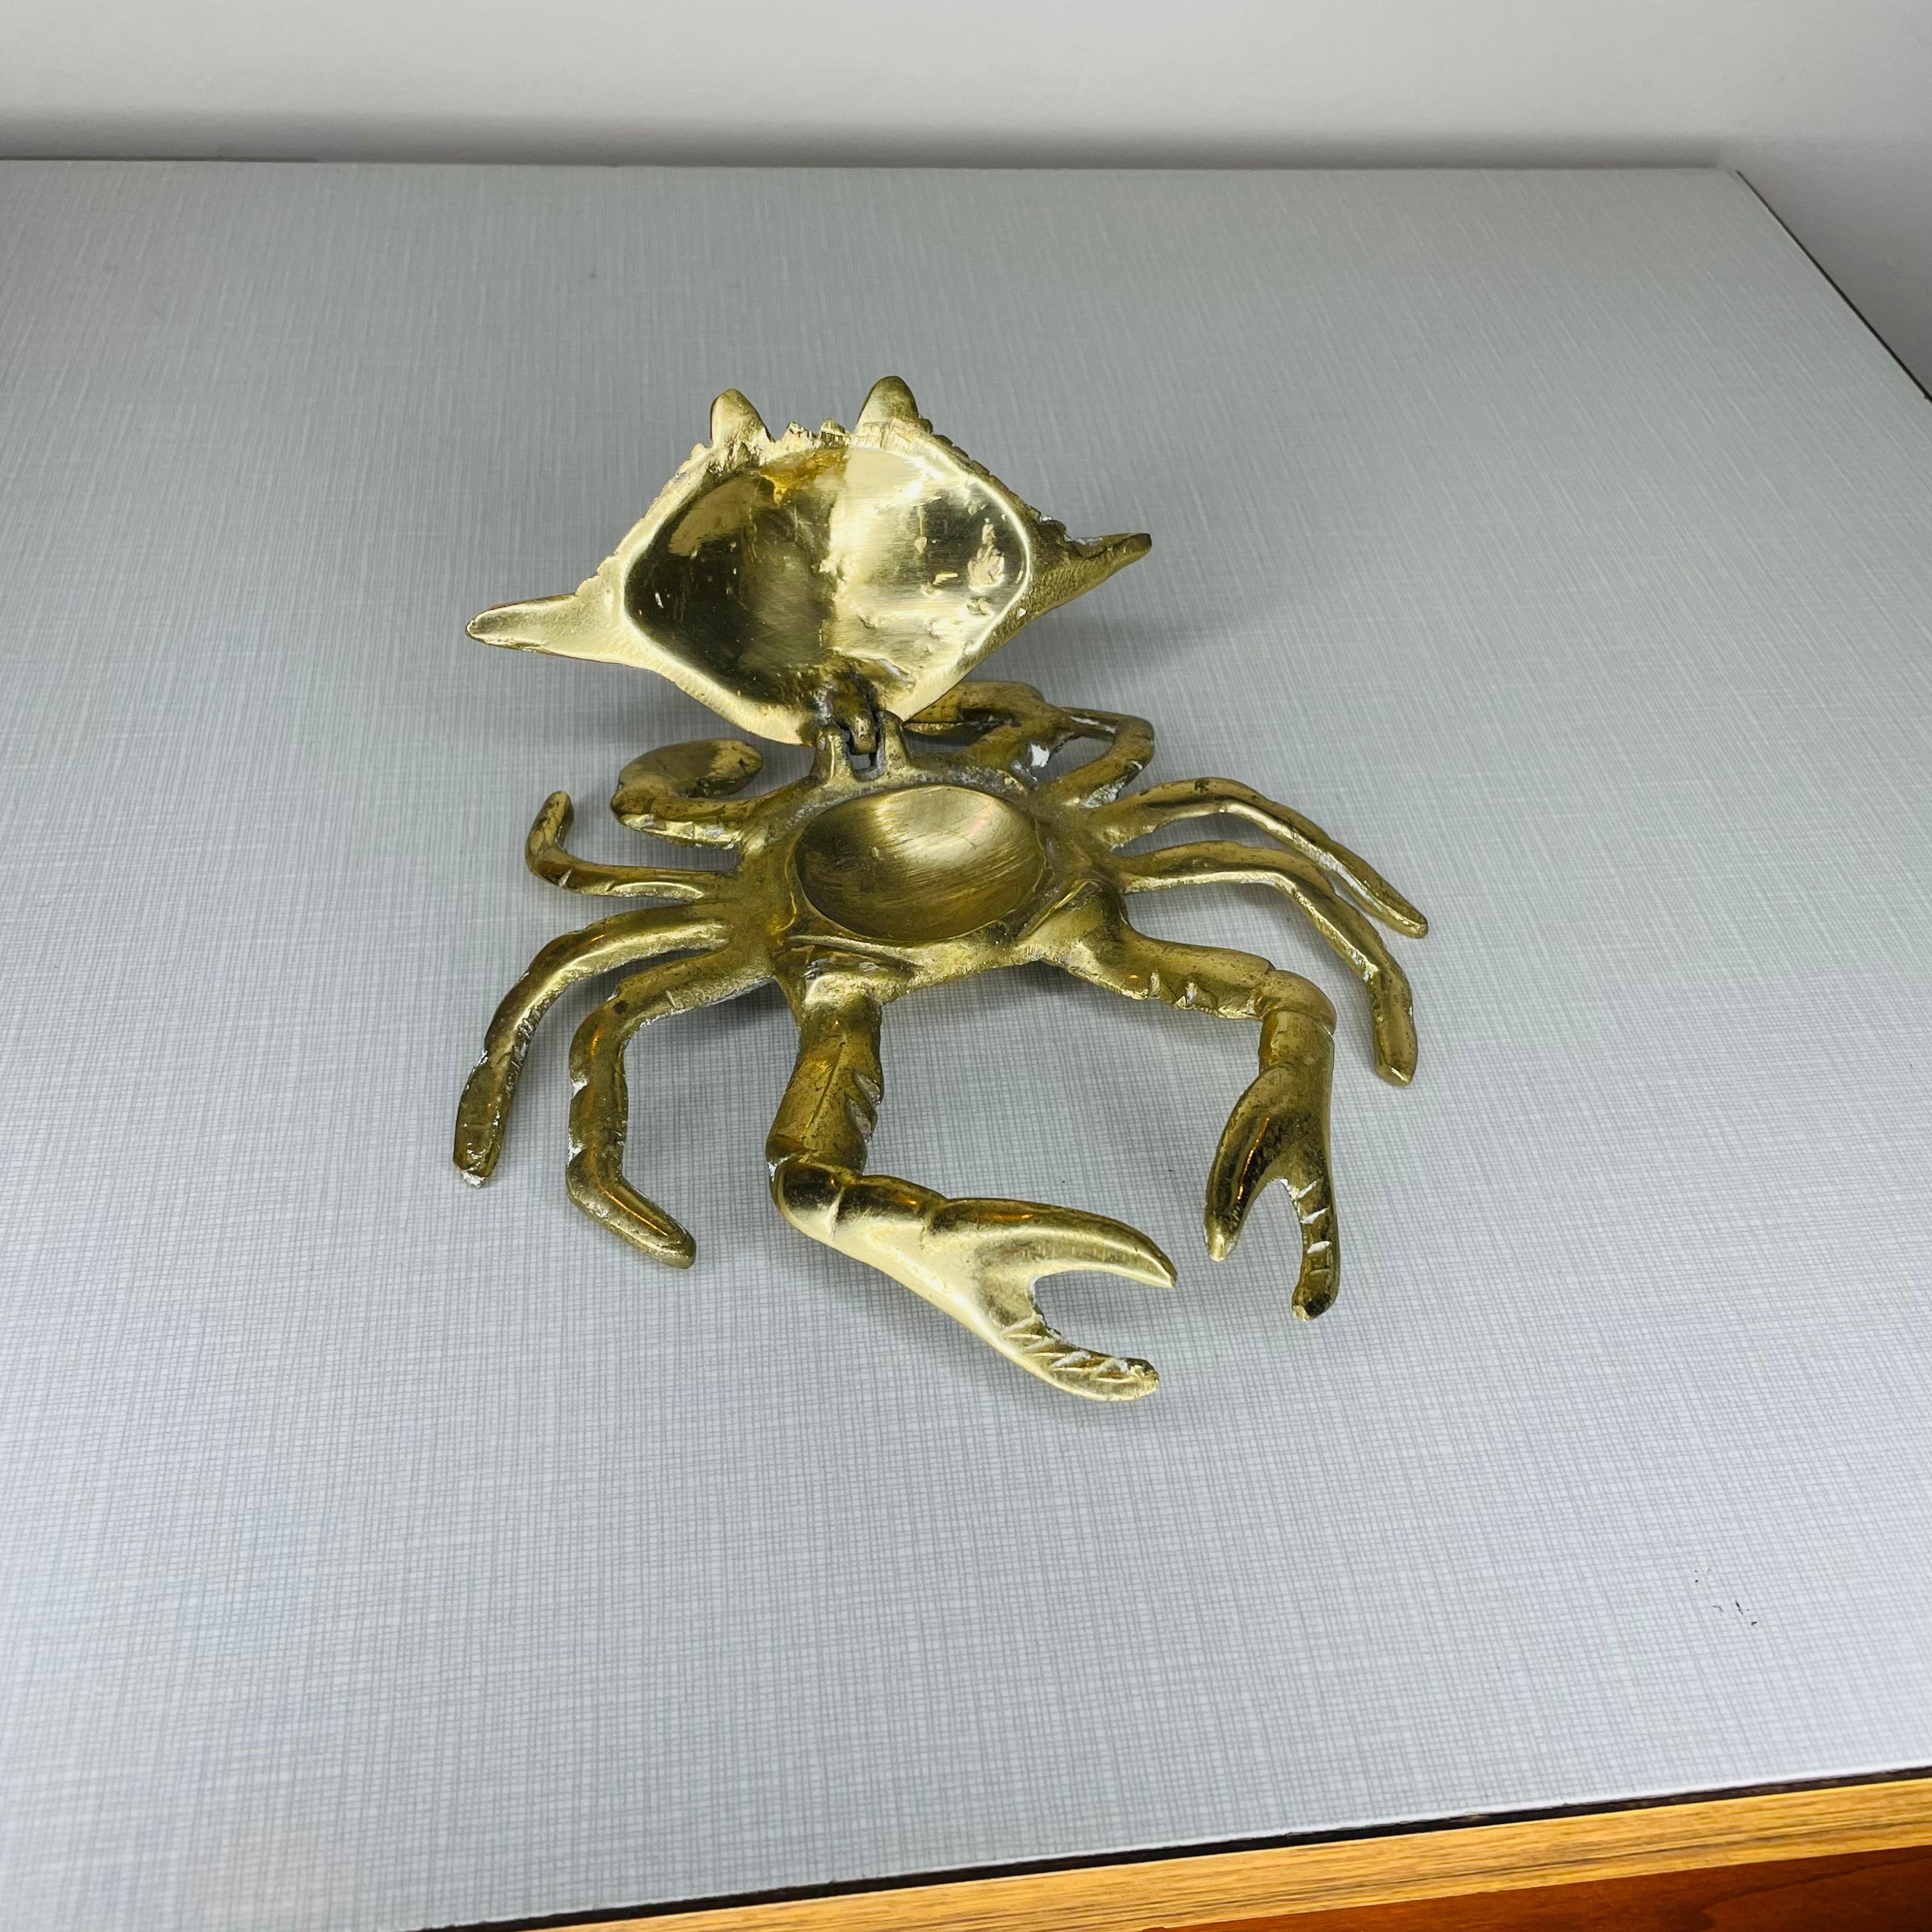 Polished brass crab figurine with attached lid. This could be used as an ashtray or could hold a few rings. There is not much storage space under the lid. The claws are stationary.